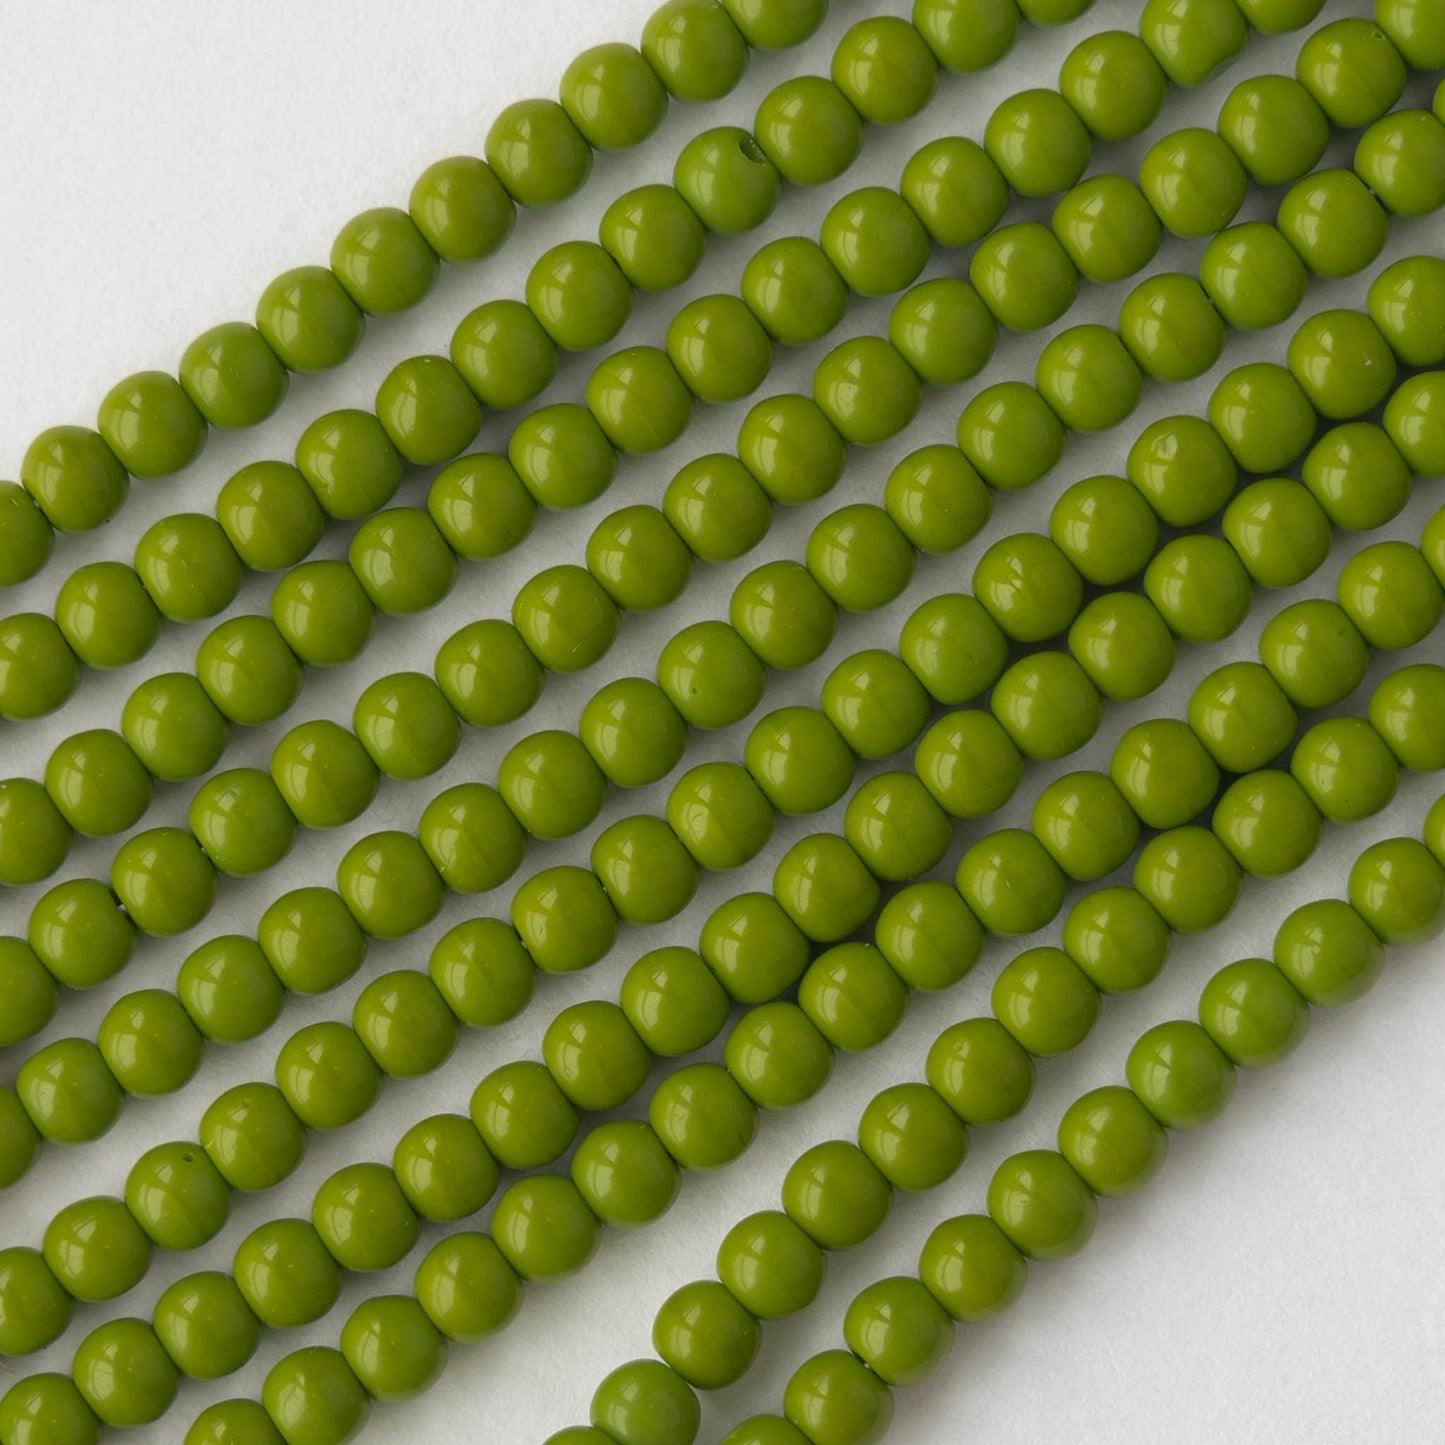 4mm Round Glass Beads - Opaque Lime Green - 120